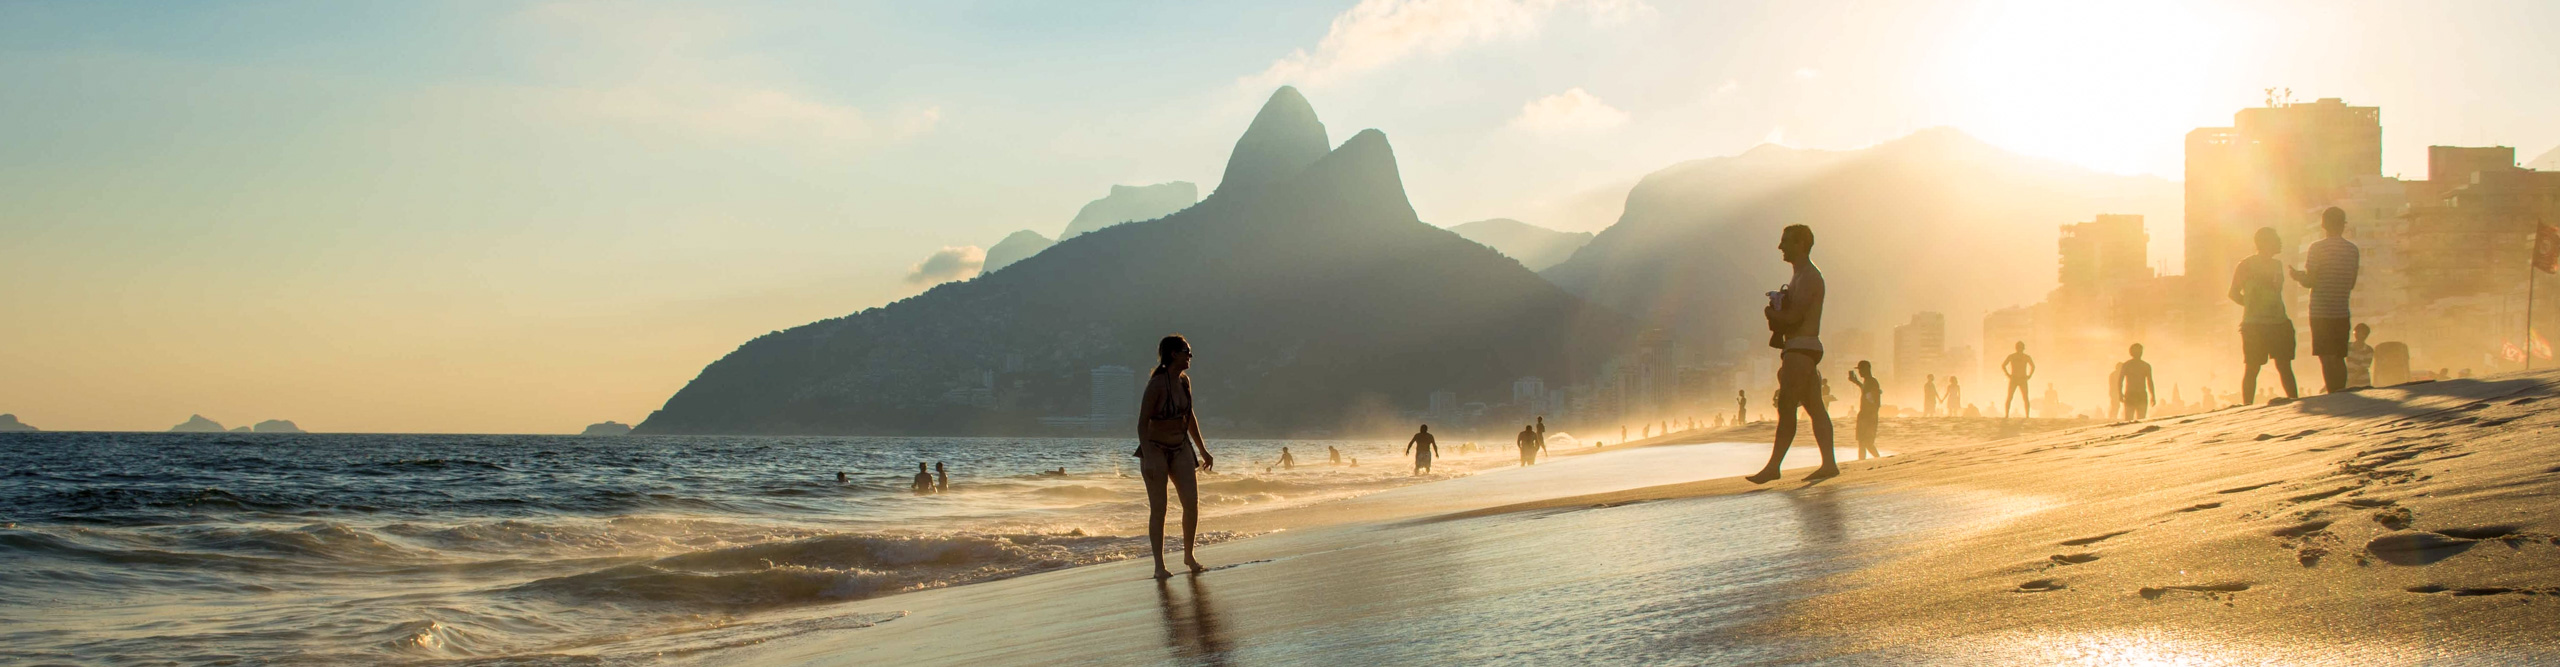 Sunset over Rio's beaches and mountains on a misty day